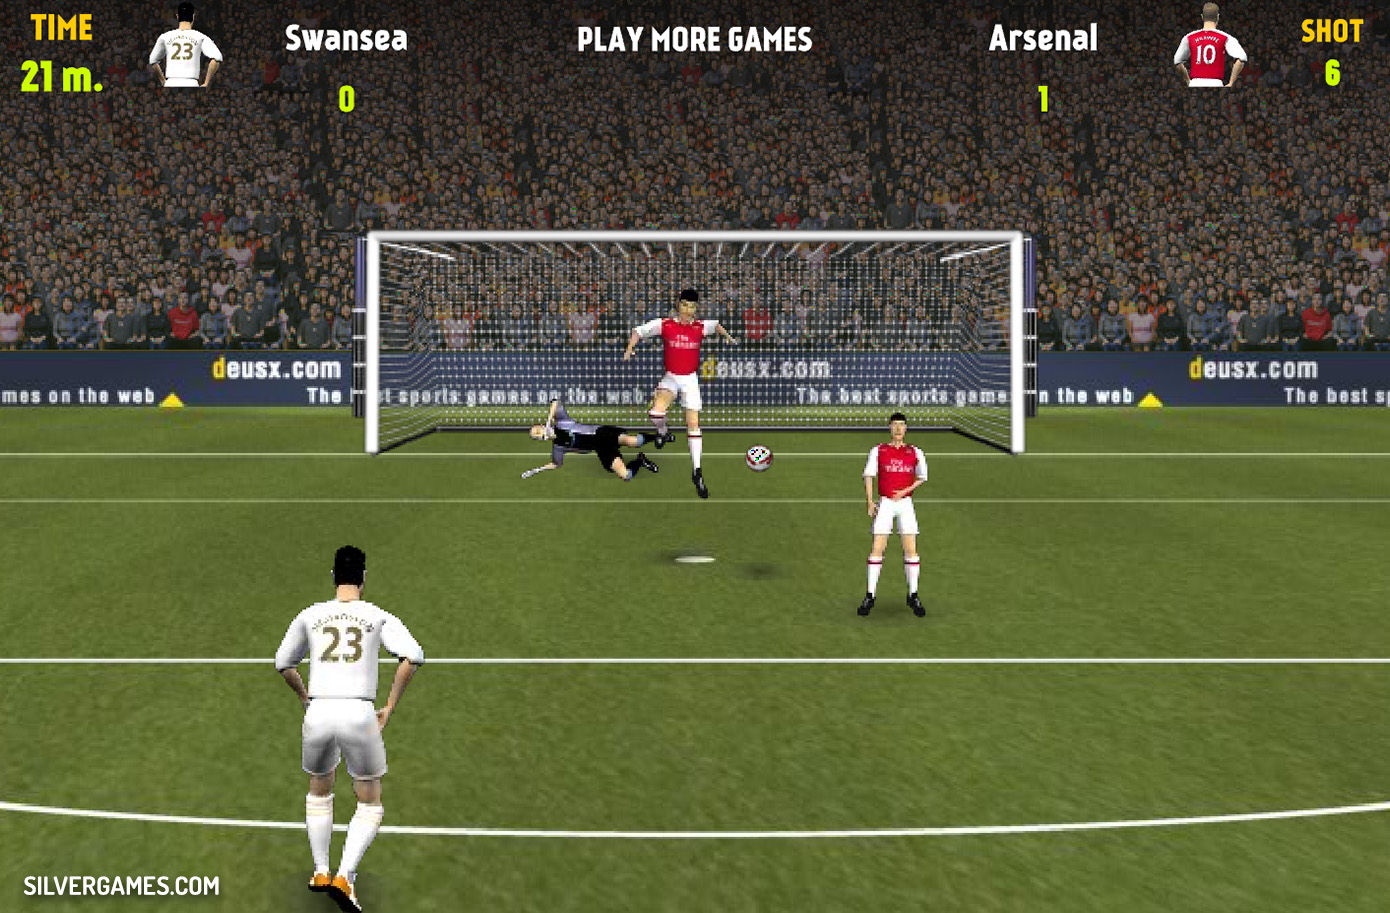 Penalty Shootout  No Internet Game - Browser Based Games